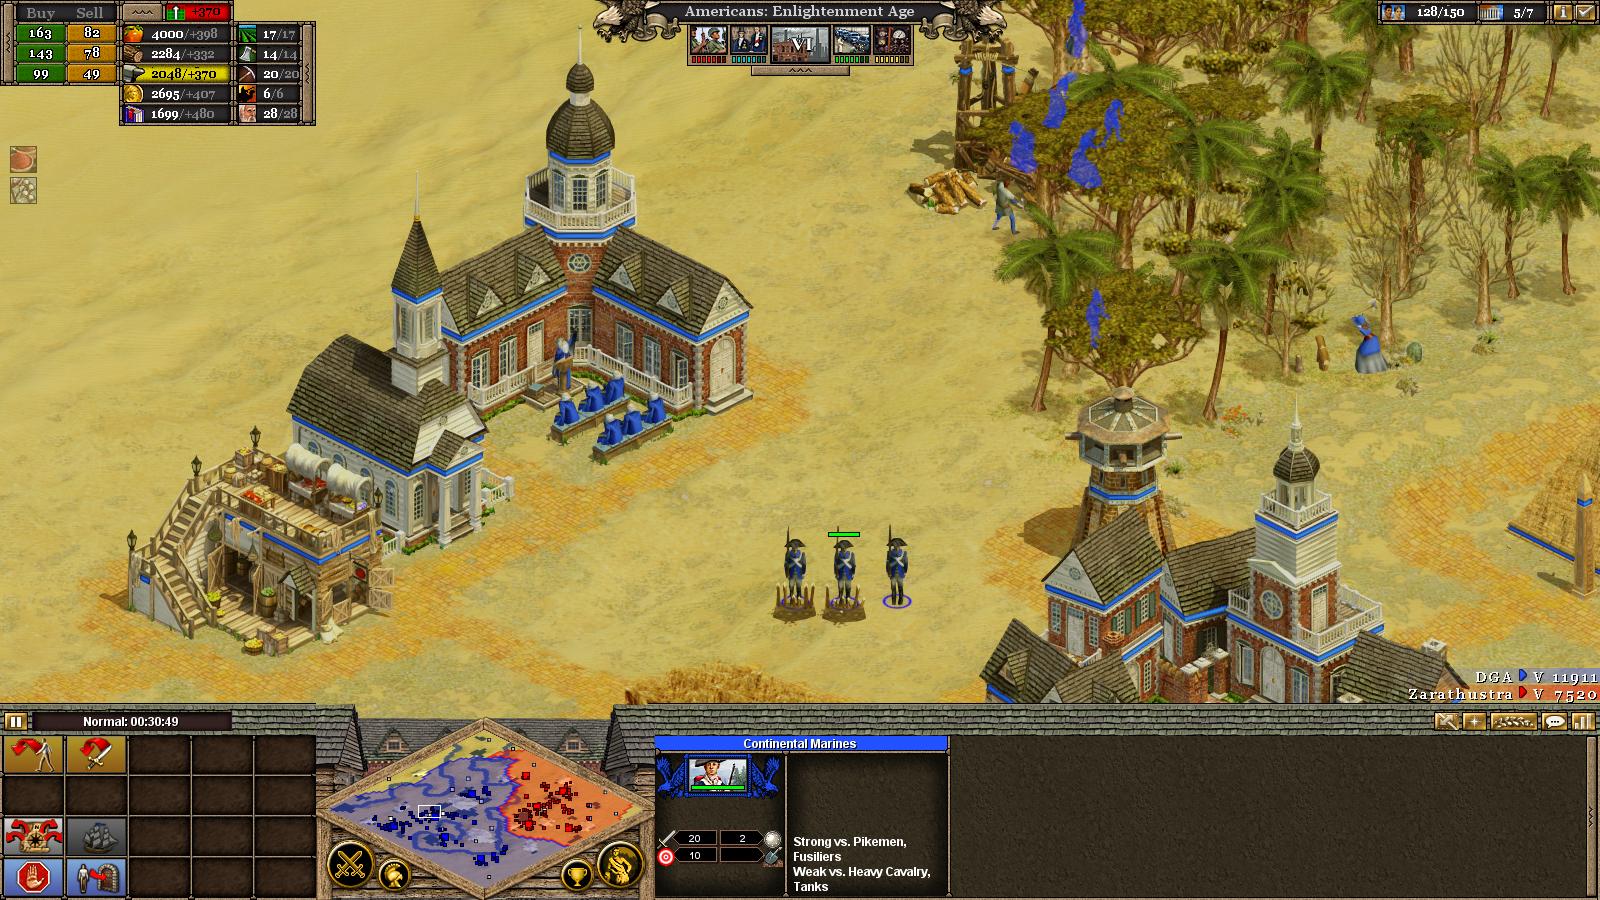 free download rise of nations steel